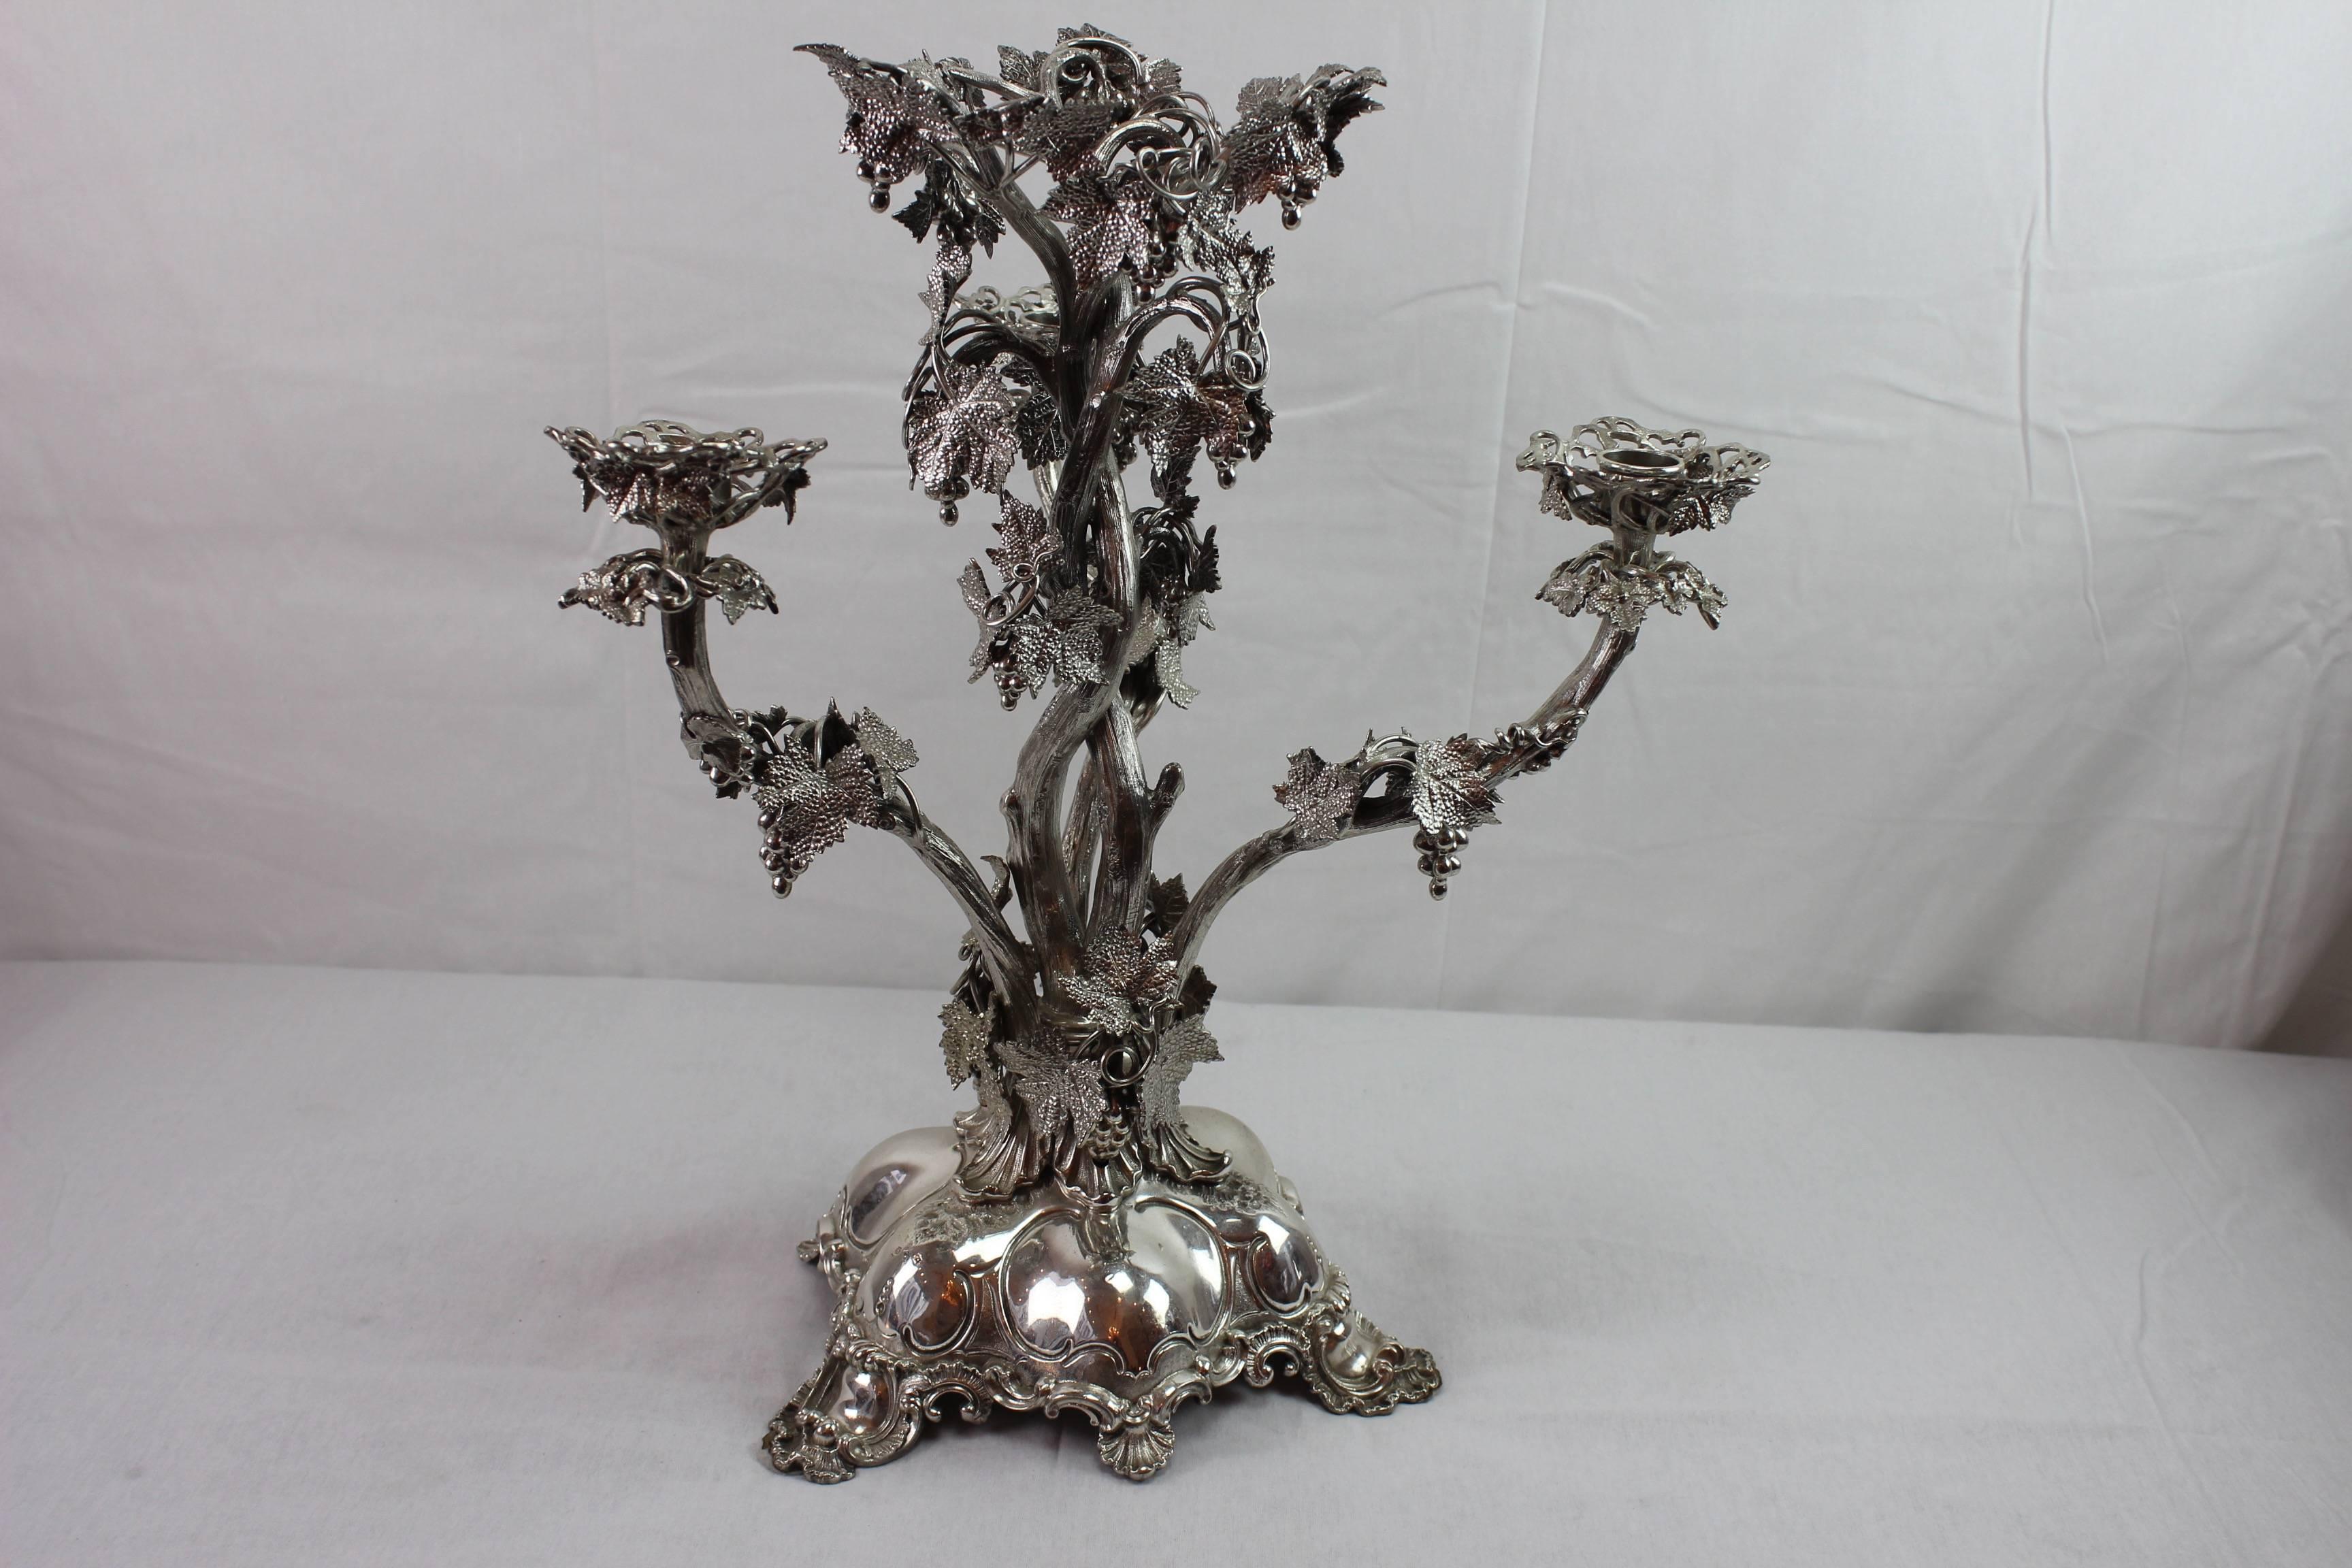 Stunningly manufactured Austrian centerpiece. Abundantly ornamented with detailed grapes and grape leaves. The original crystal bowl which is usually placed on the top is unfortunately missing.
Has a 19th century Swedish silver hallmark.